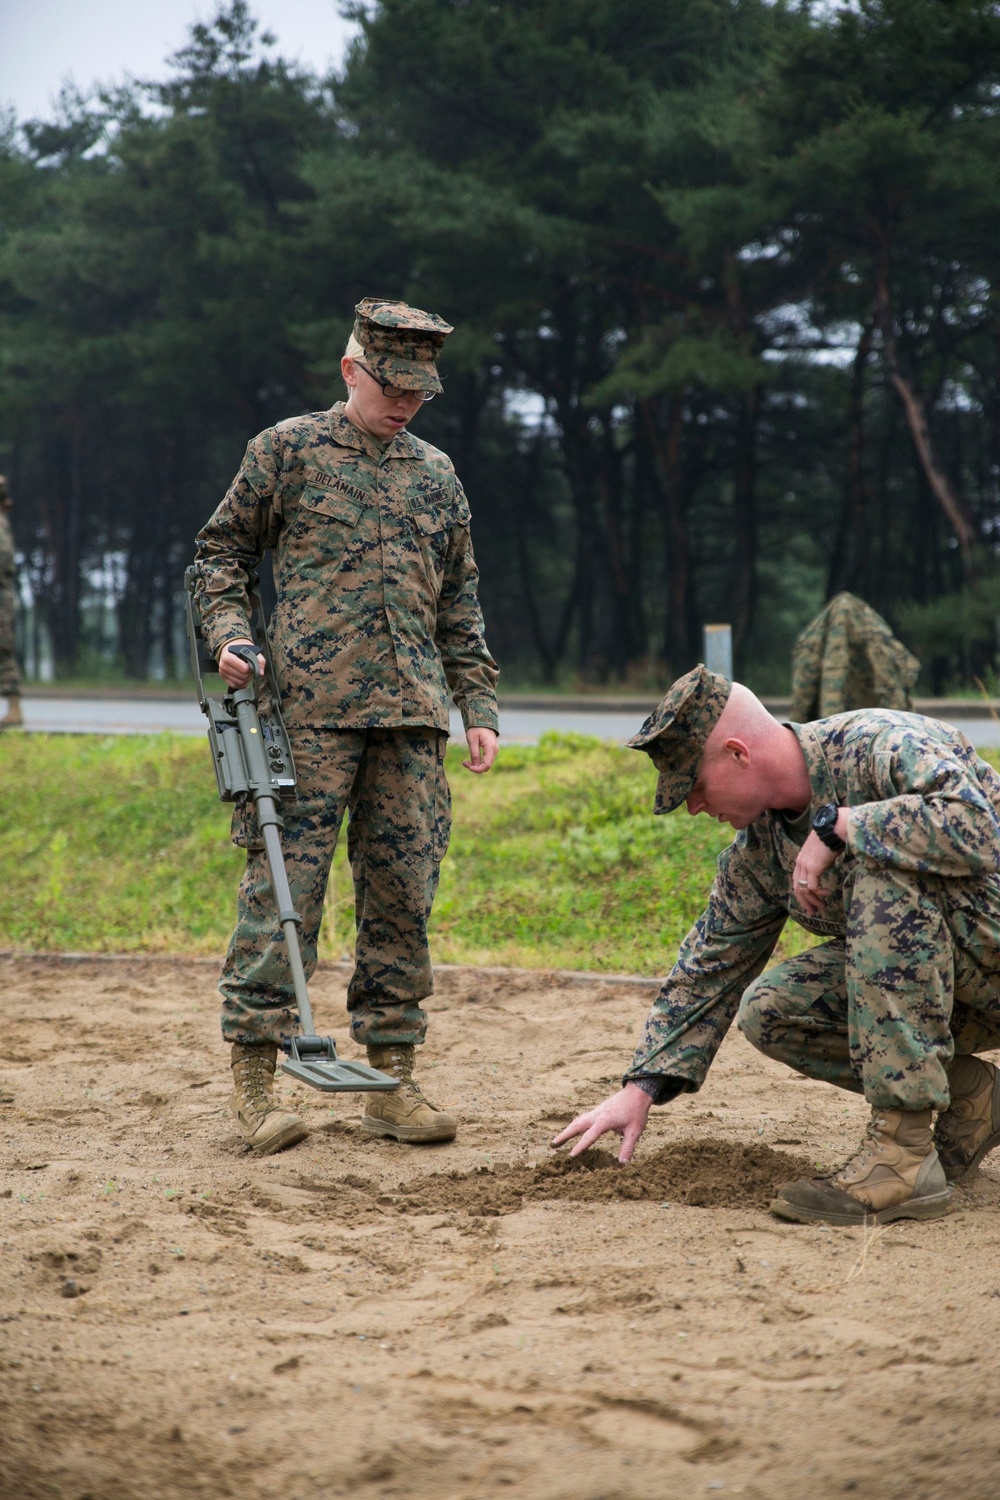 IED lanes prepare Marines for future conflict